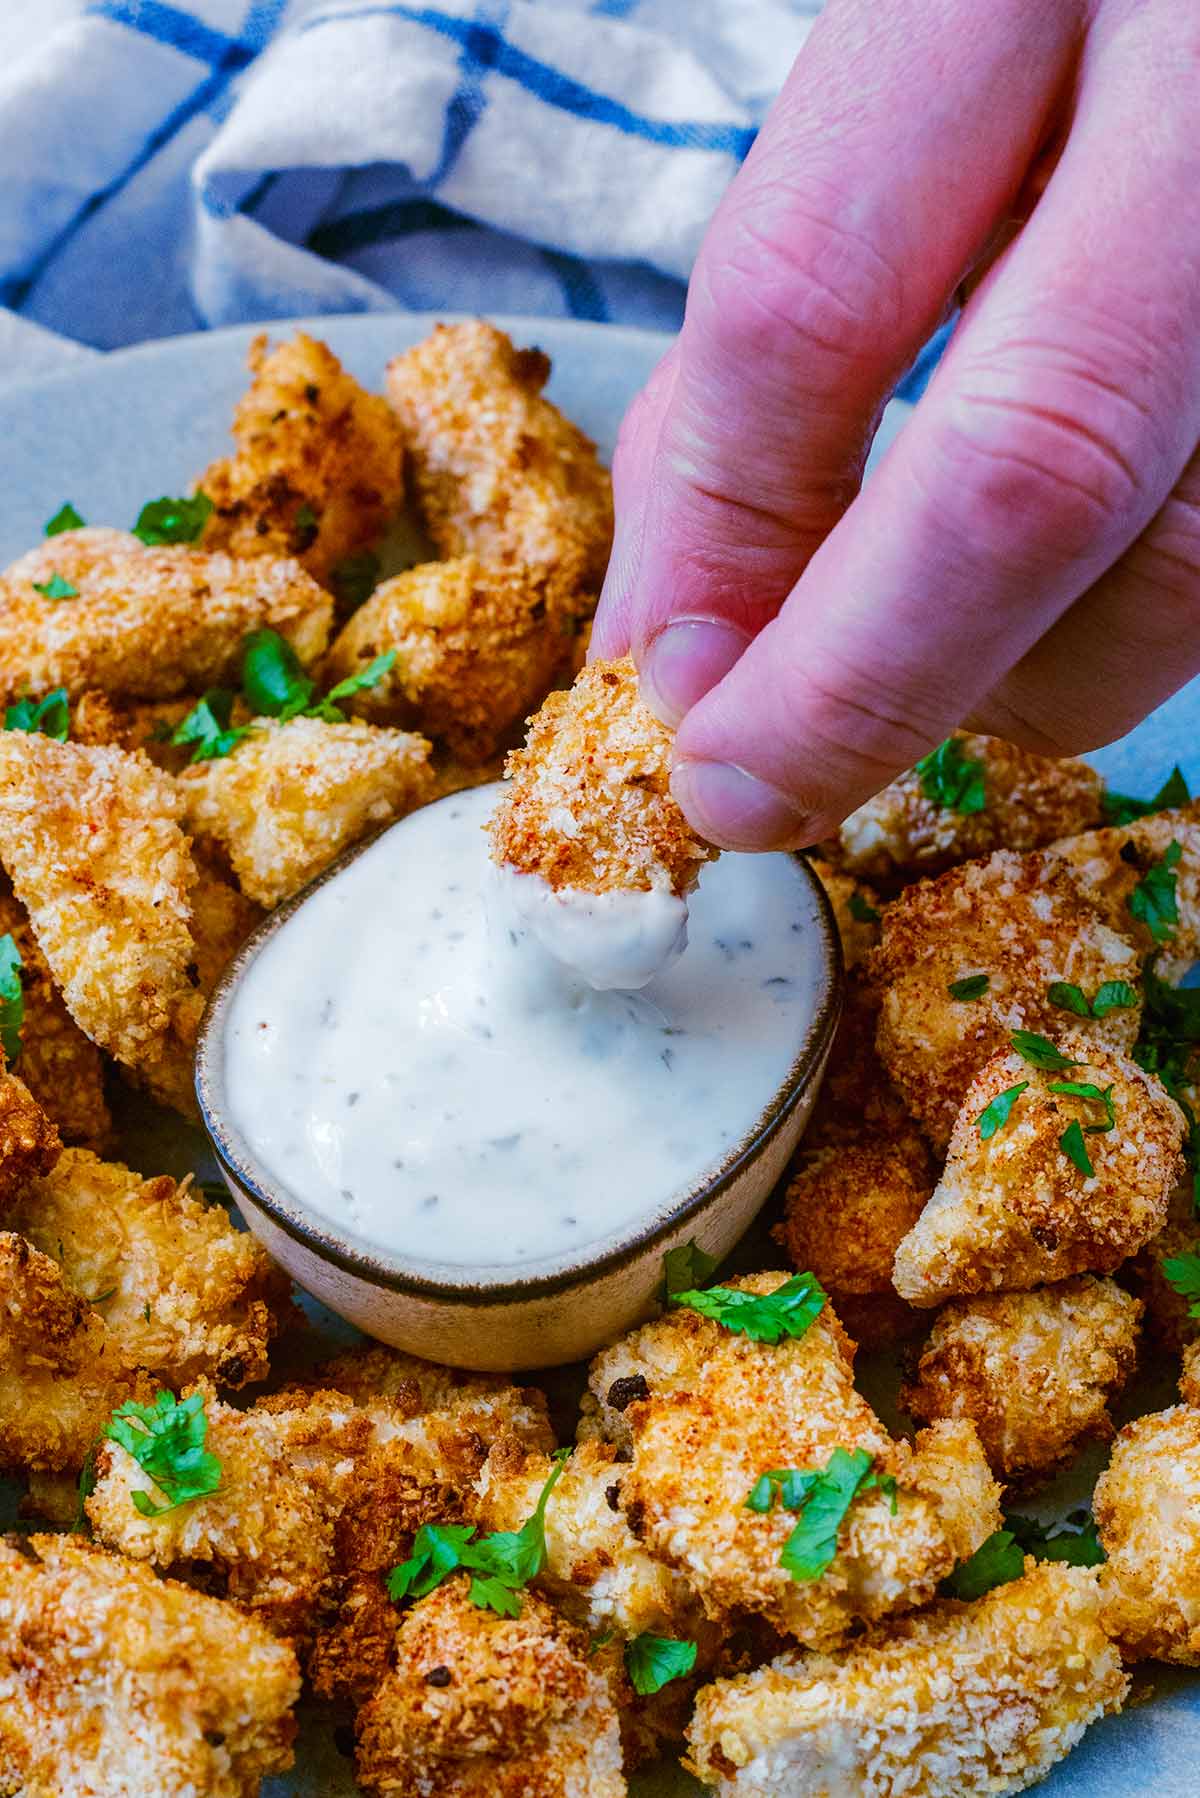 A hand dipping some breaded chicken into a creamy white sauce.